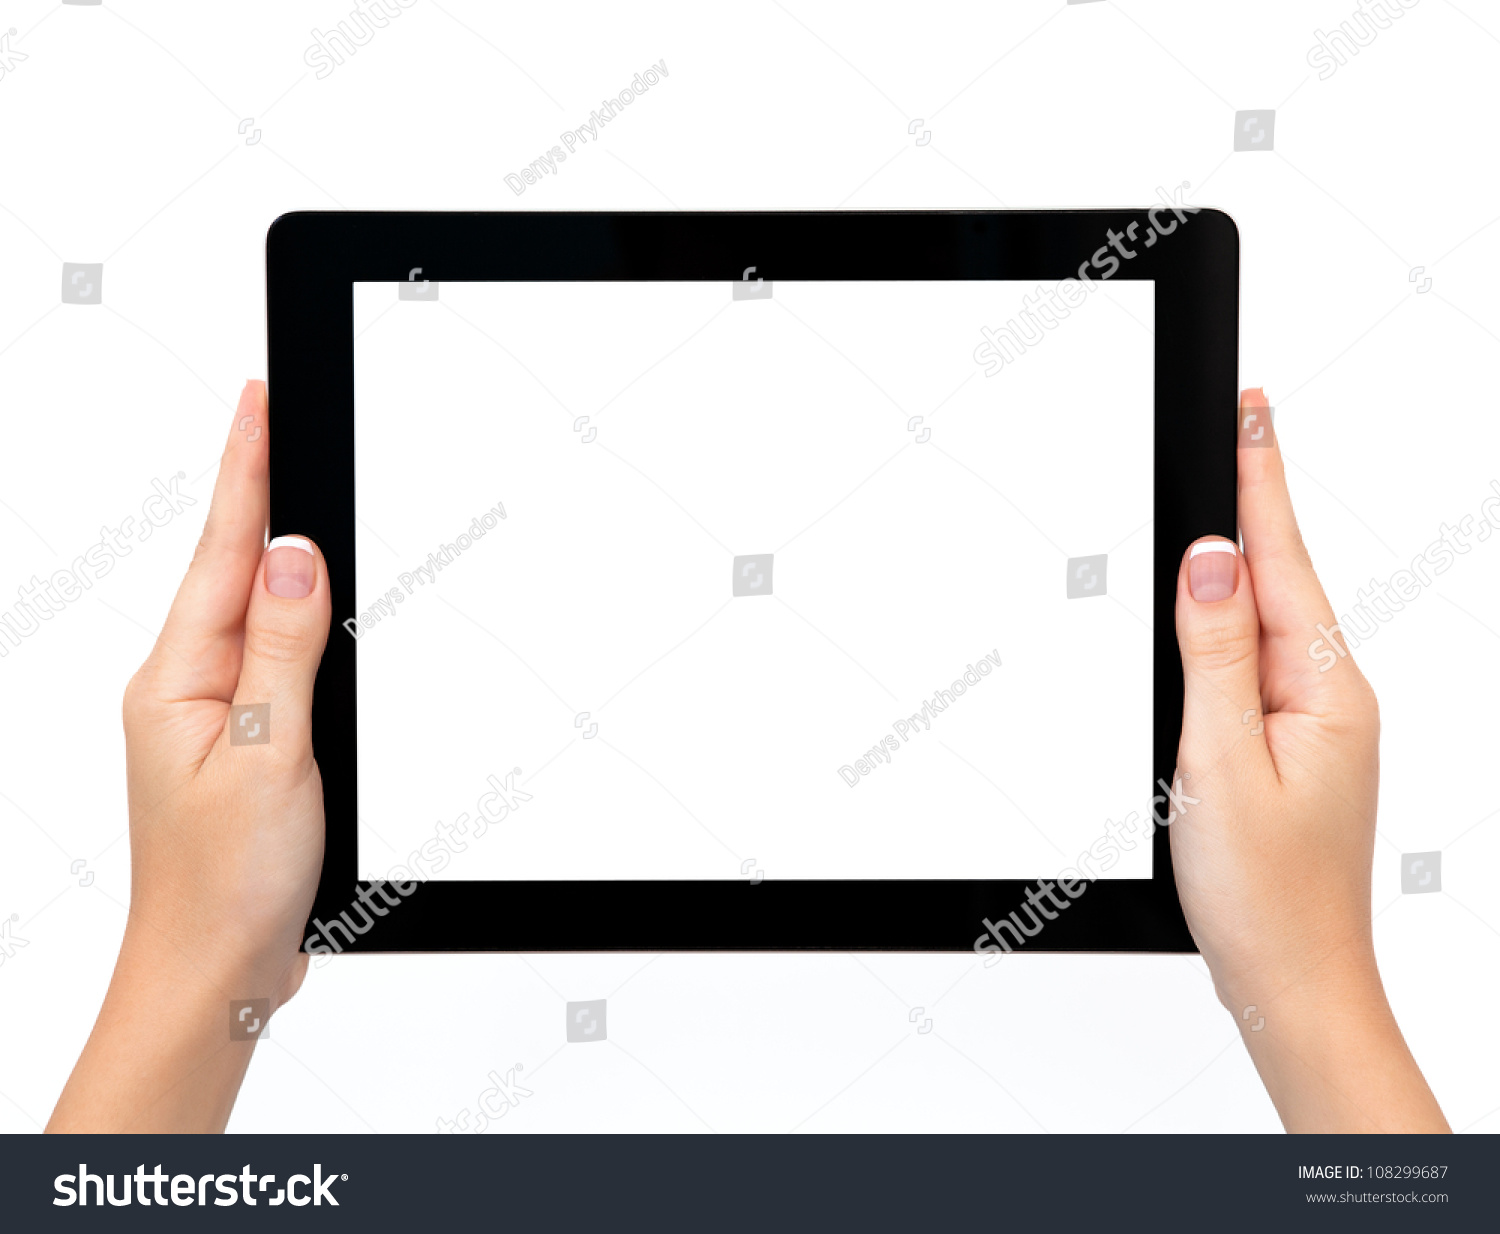 female hands holding a tablet touch computer gadget with isolated screen #108299687